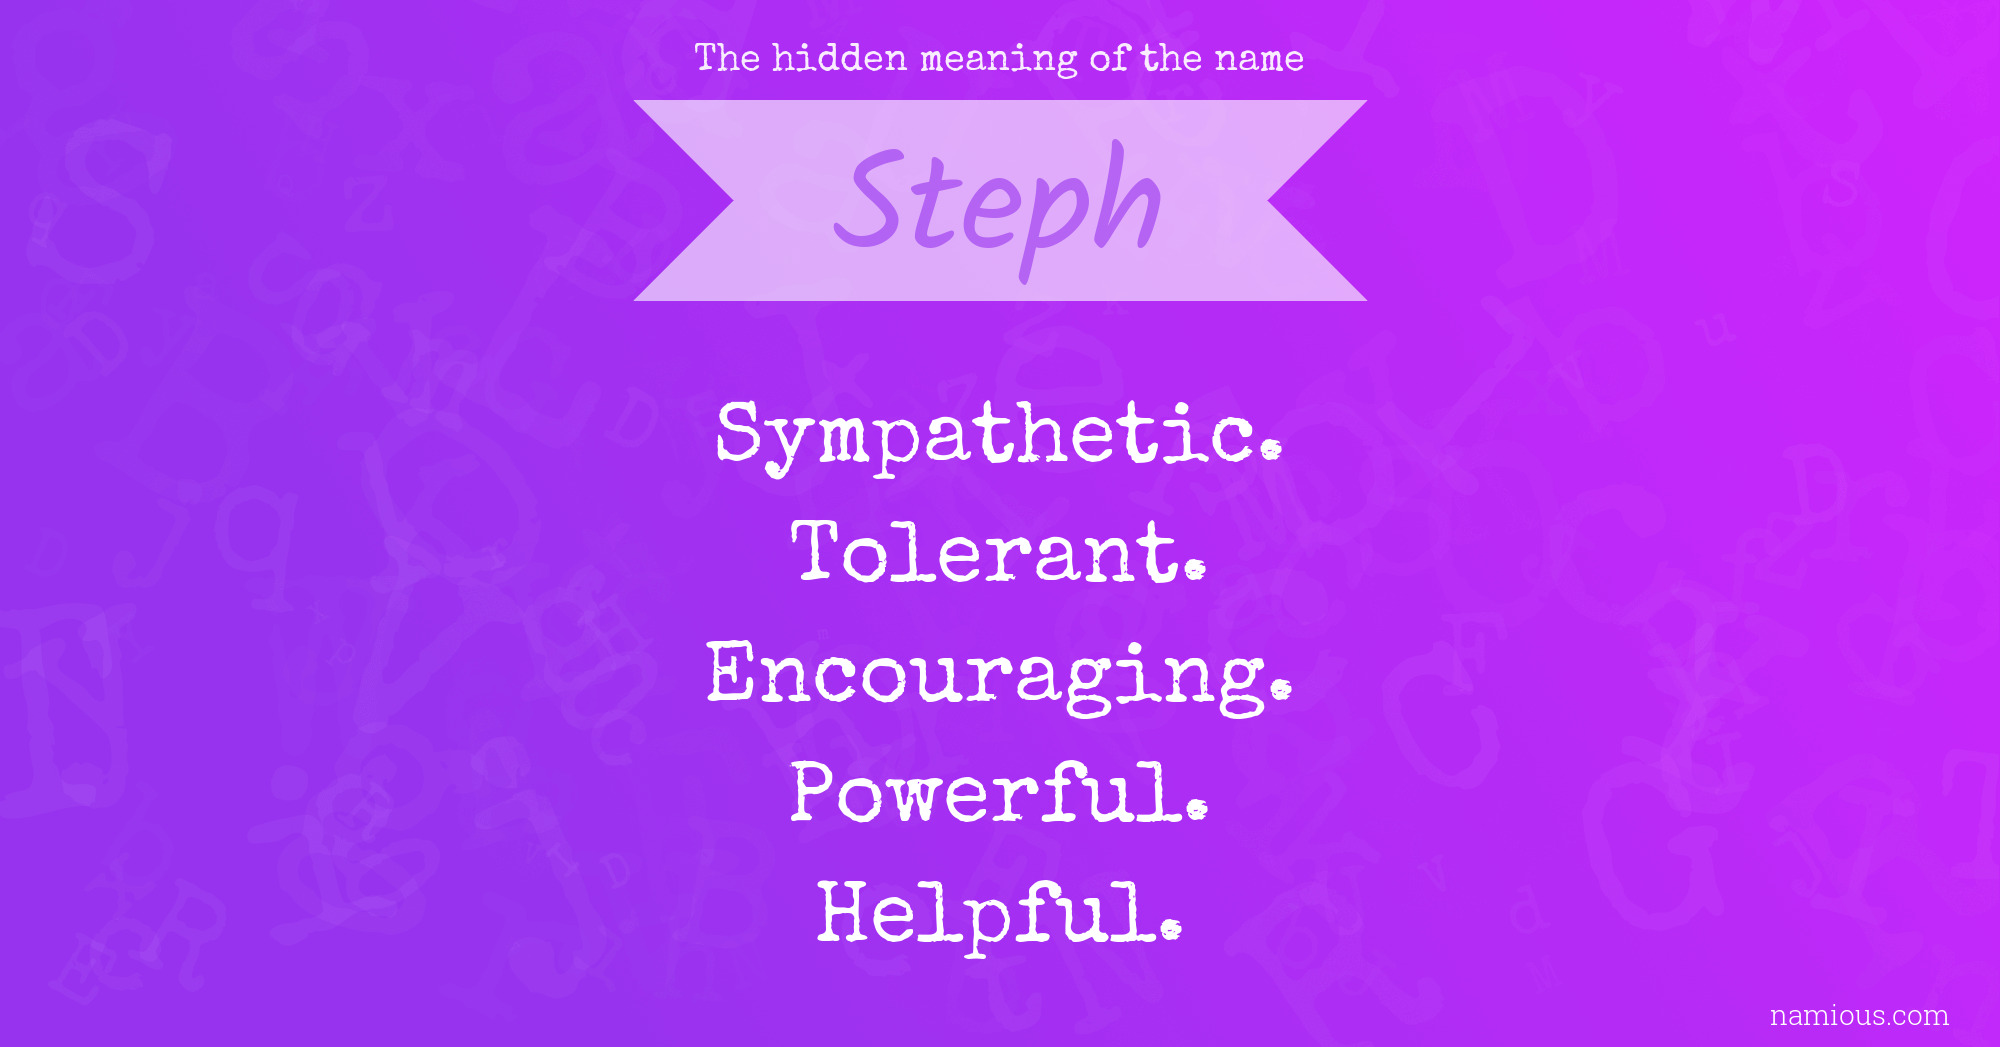 The hidden meaning of the name Steph